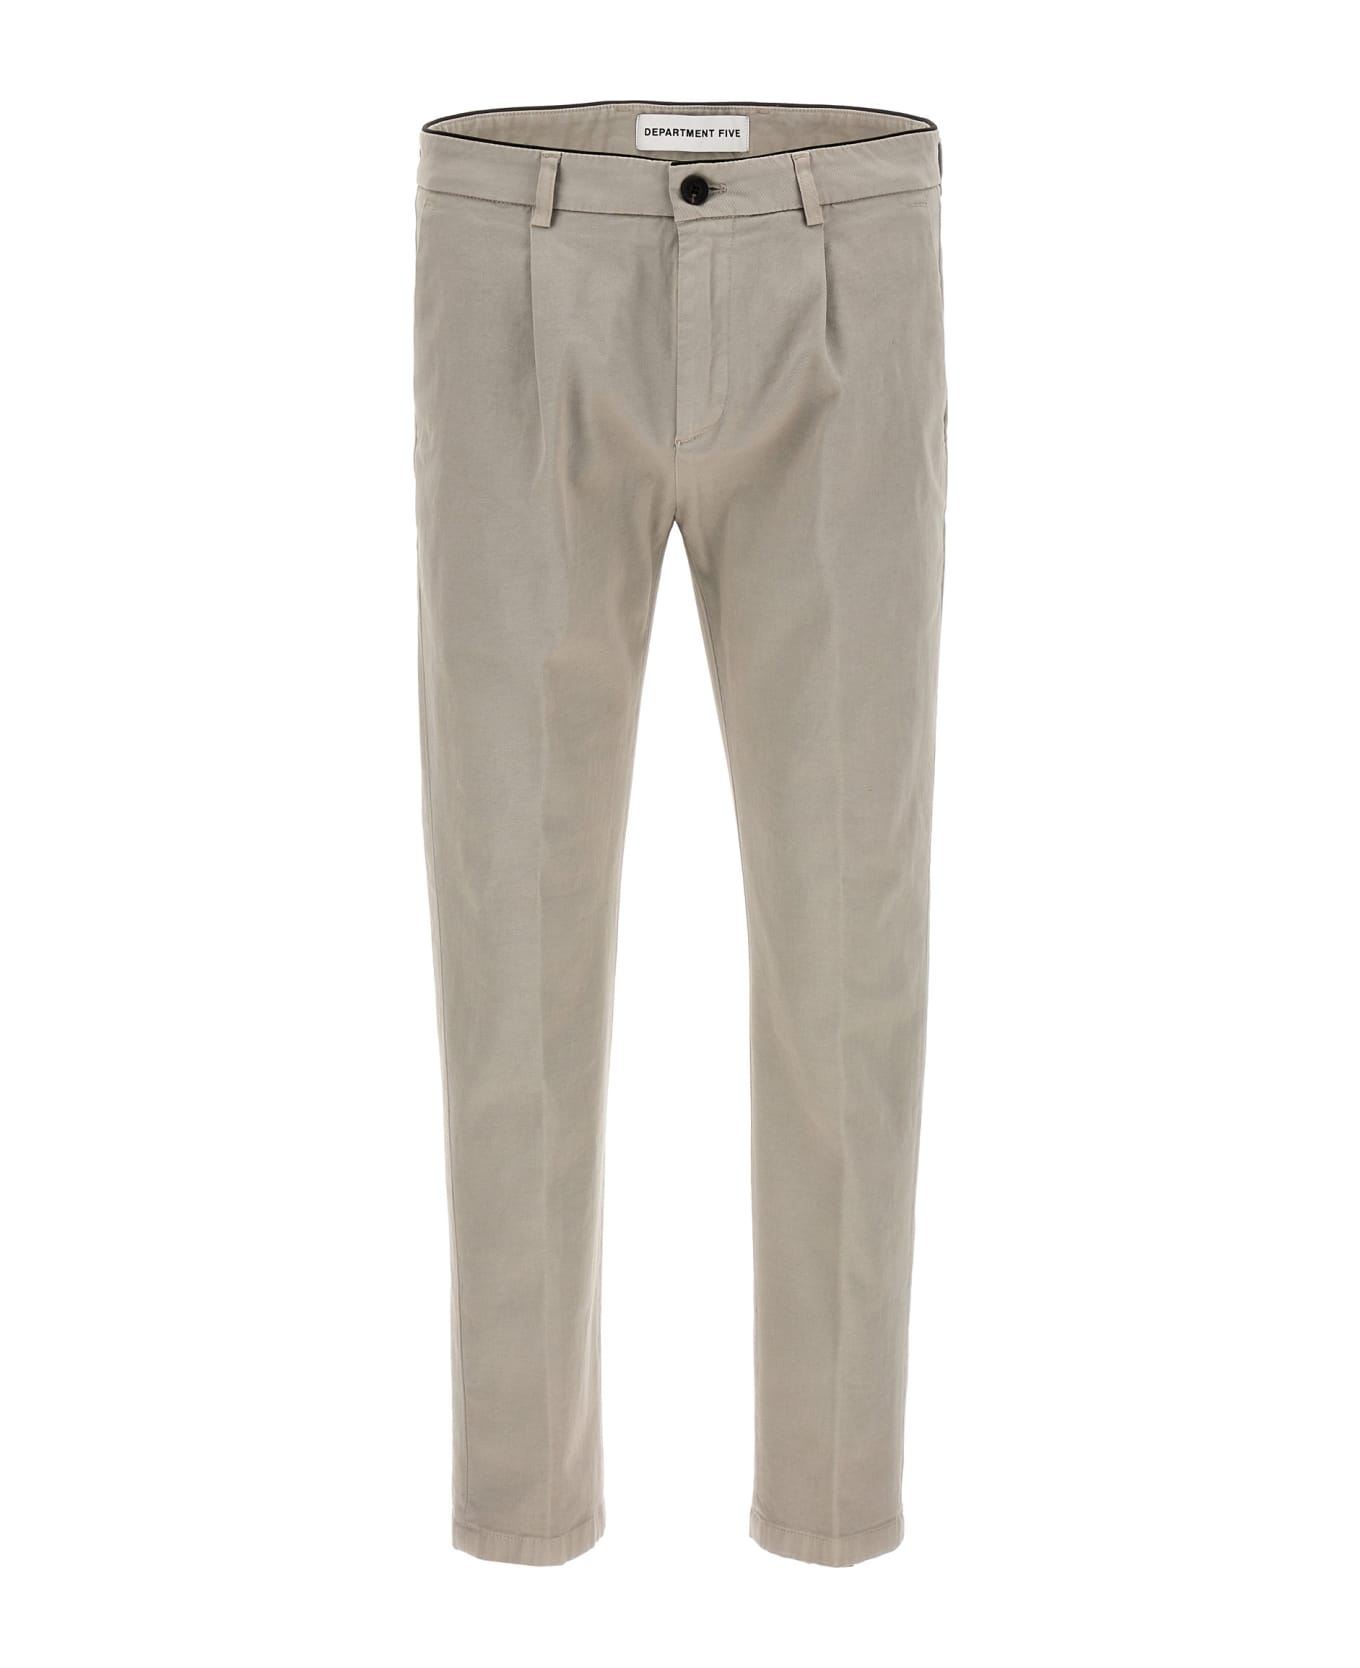 Department Five 'prince' Pants - Beige ボトムス